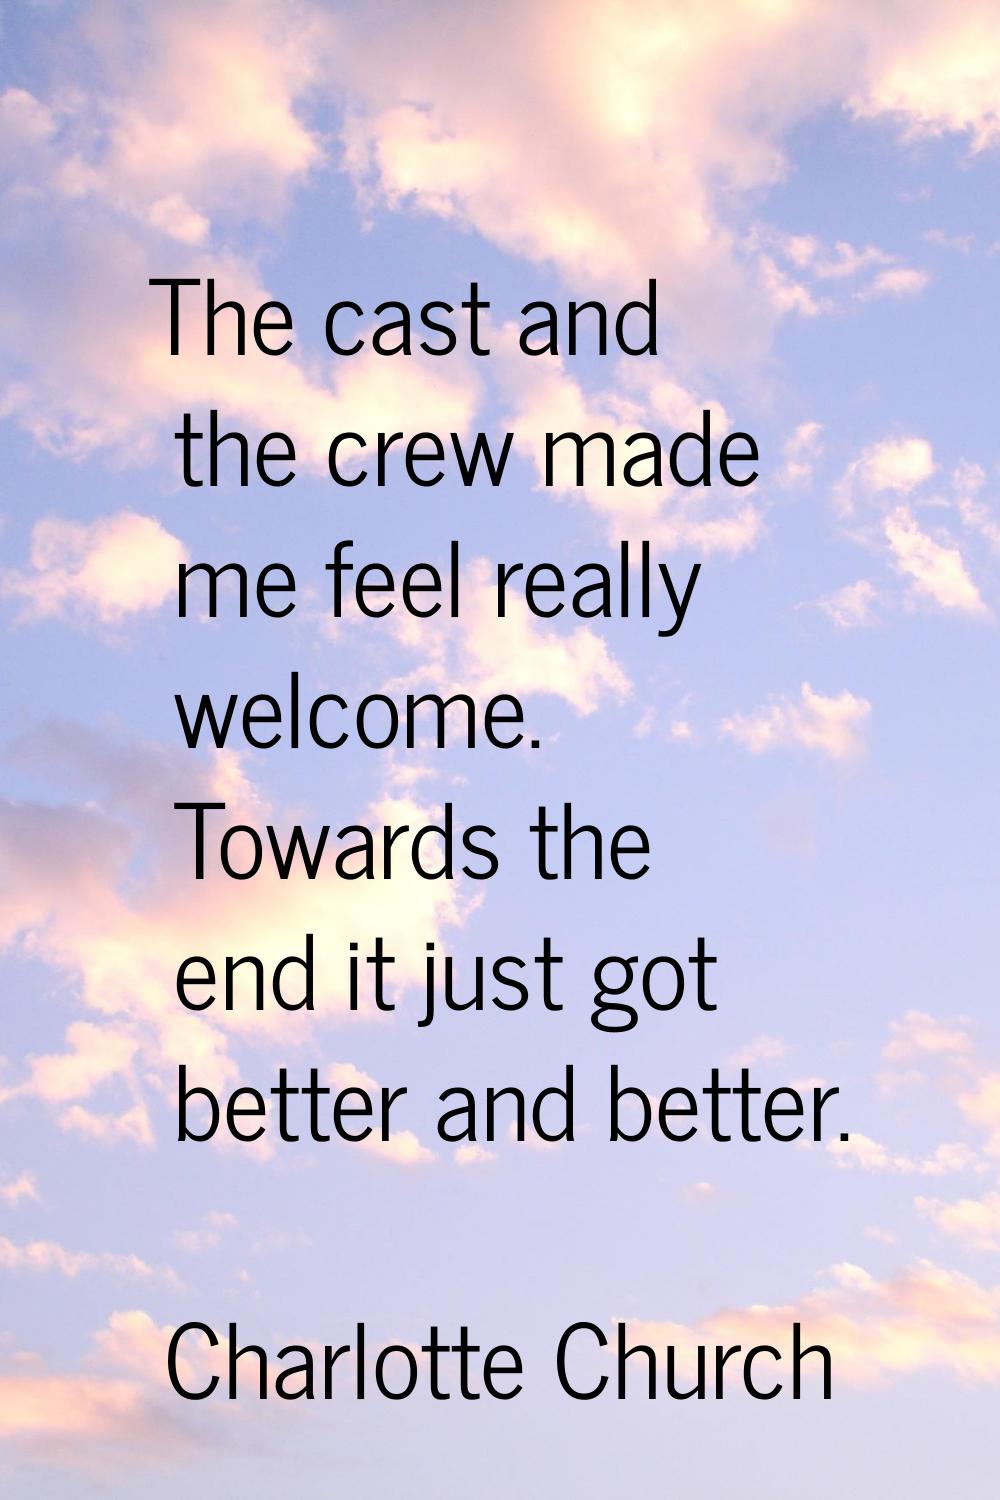 The cast and the crew made me feel really welcome. Towards the end it just got better and better.